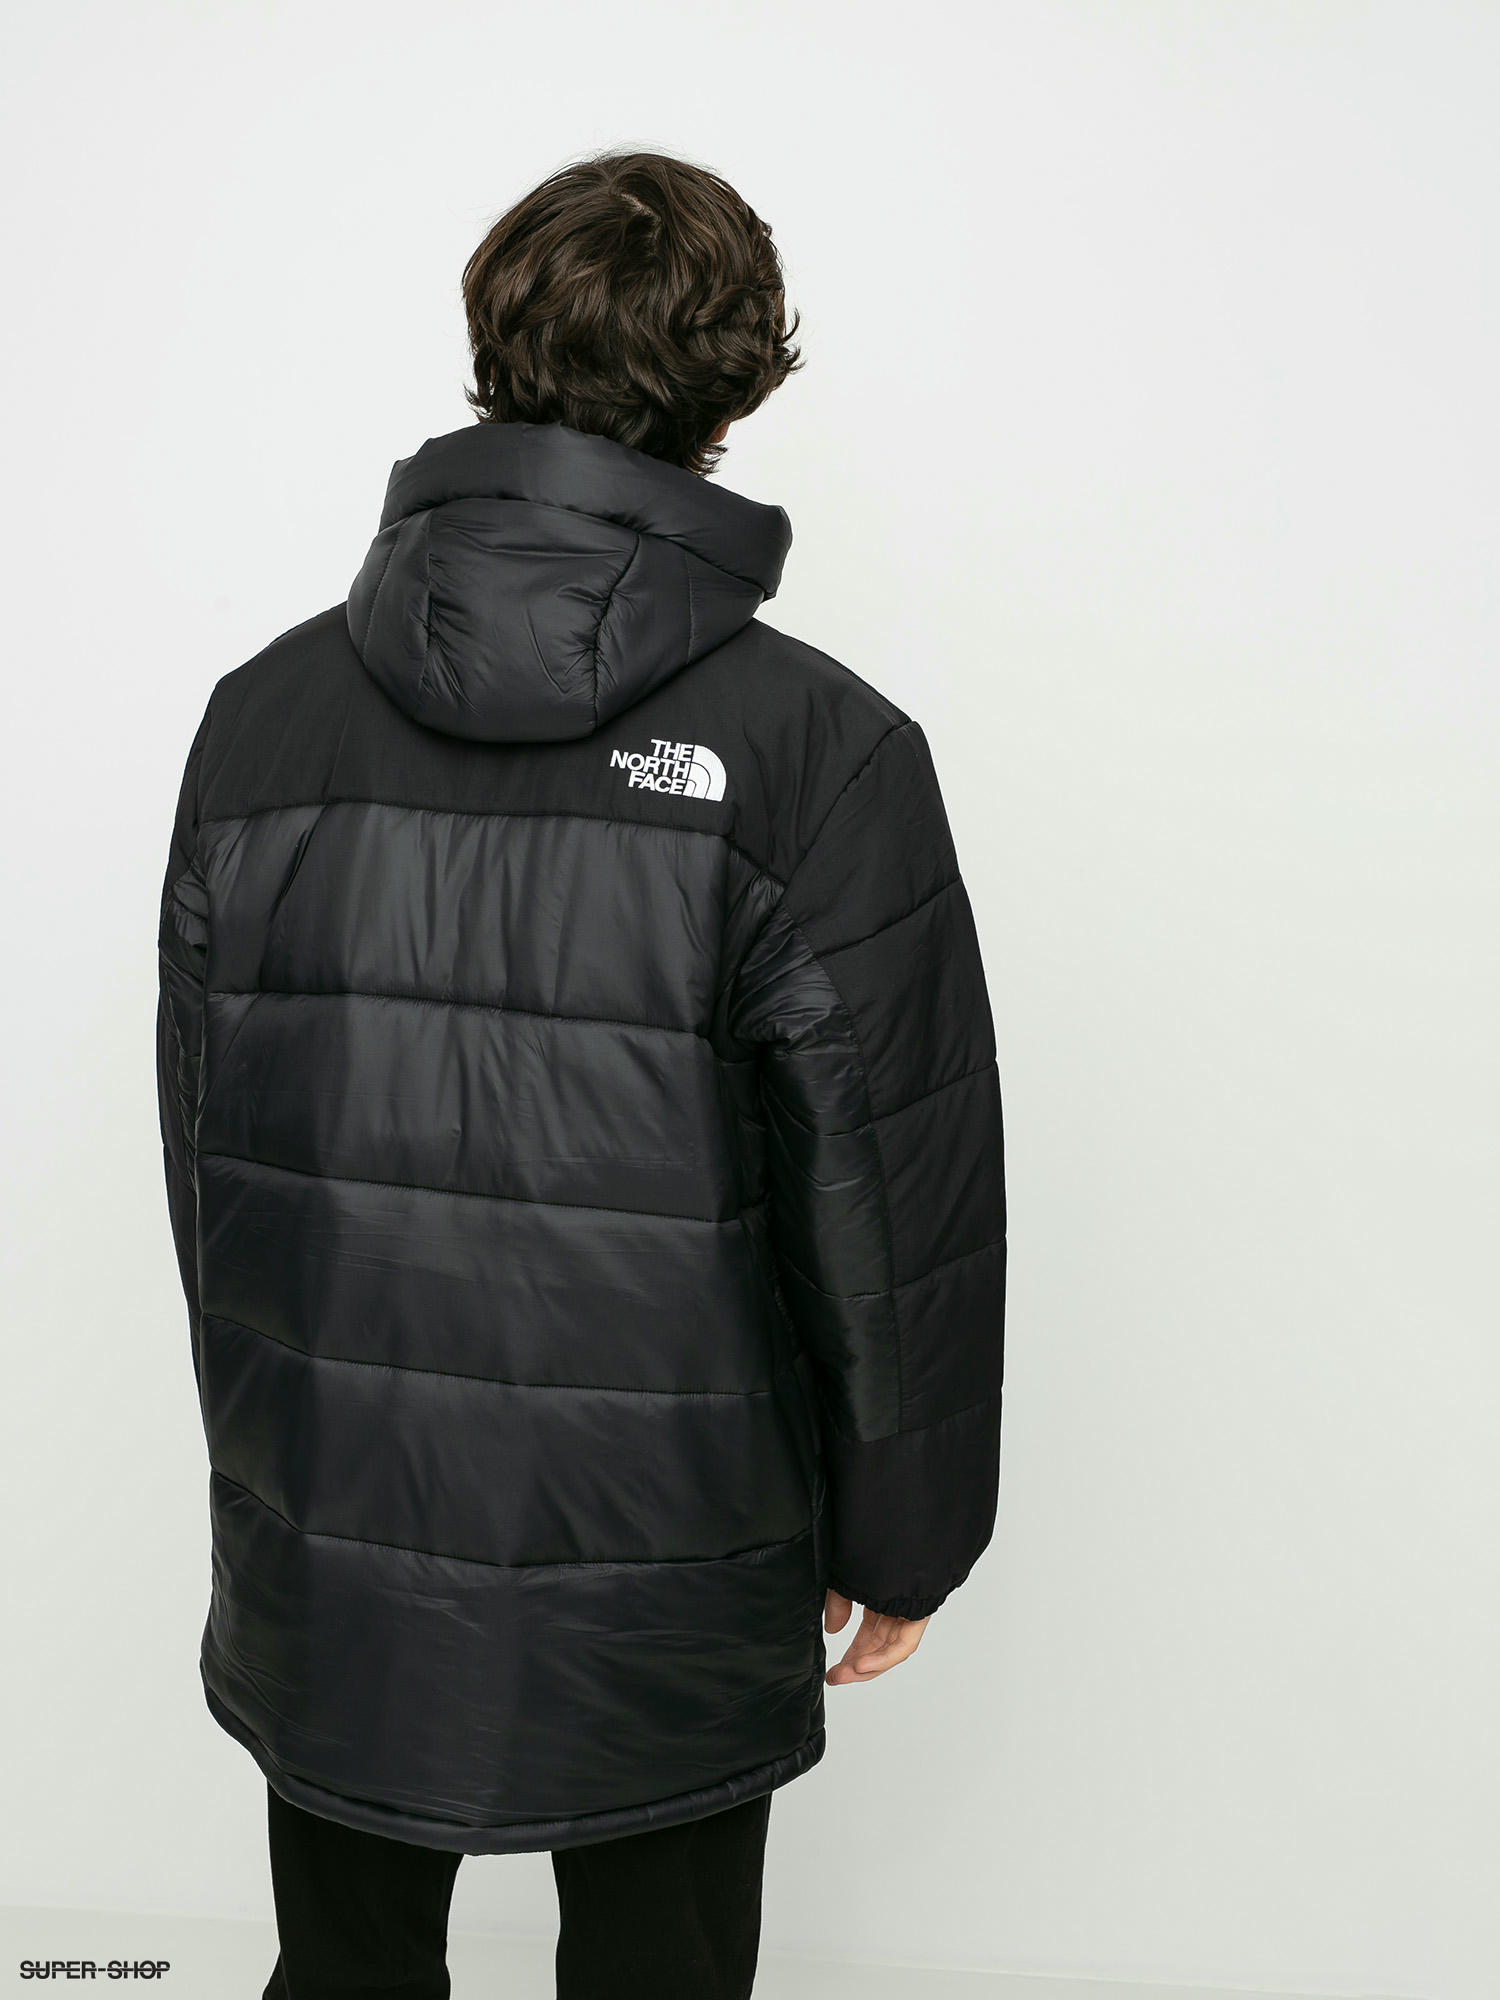 【Sサイズ】 THE NORTH FACE HMLYN INS JKT